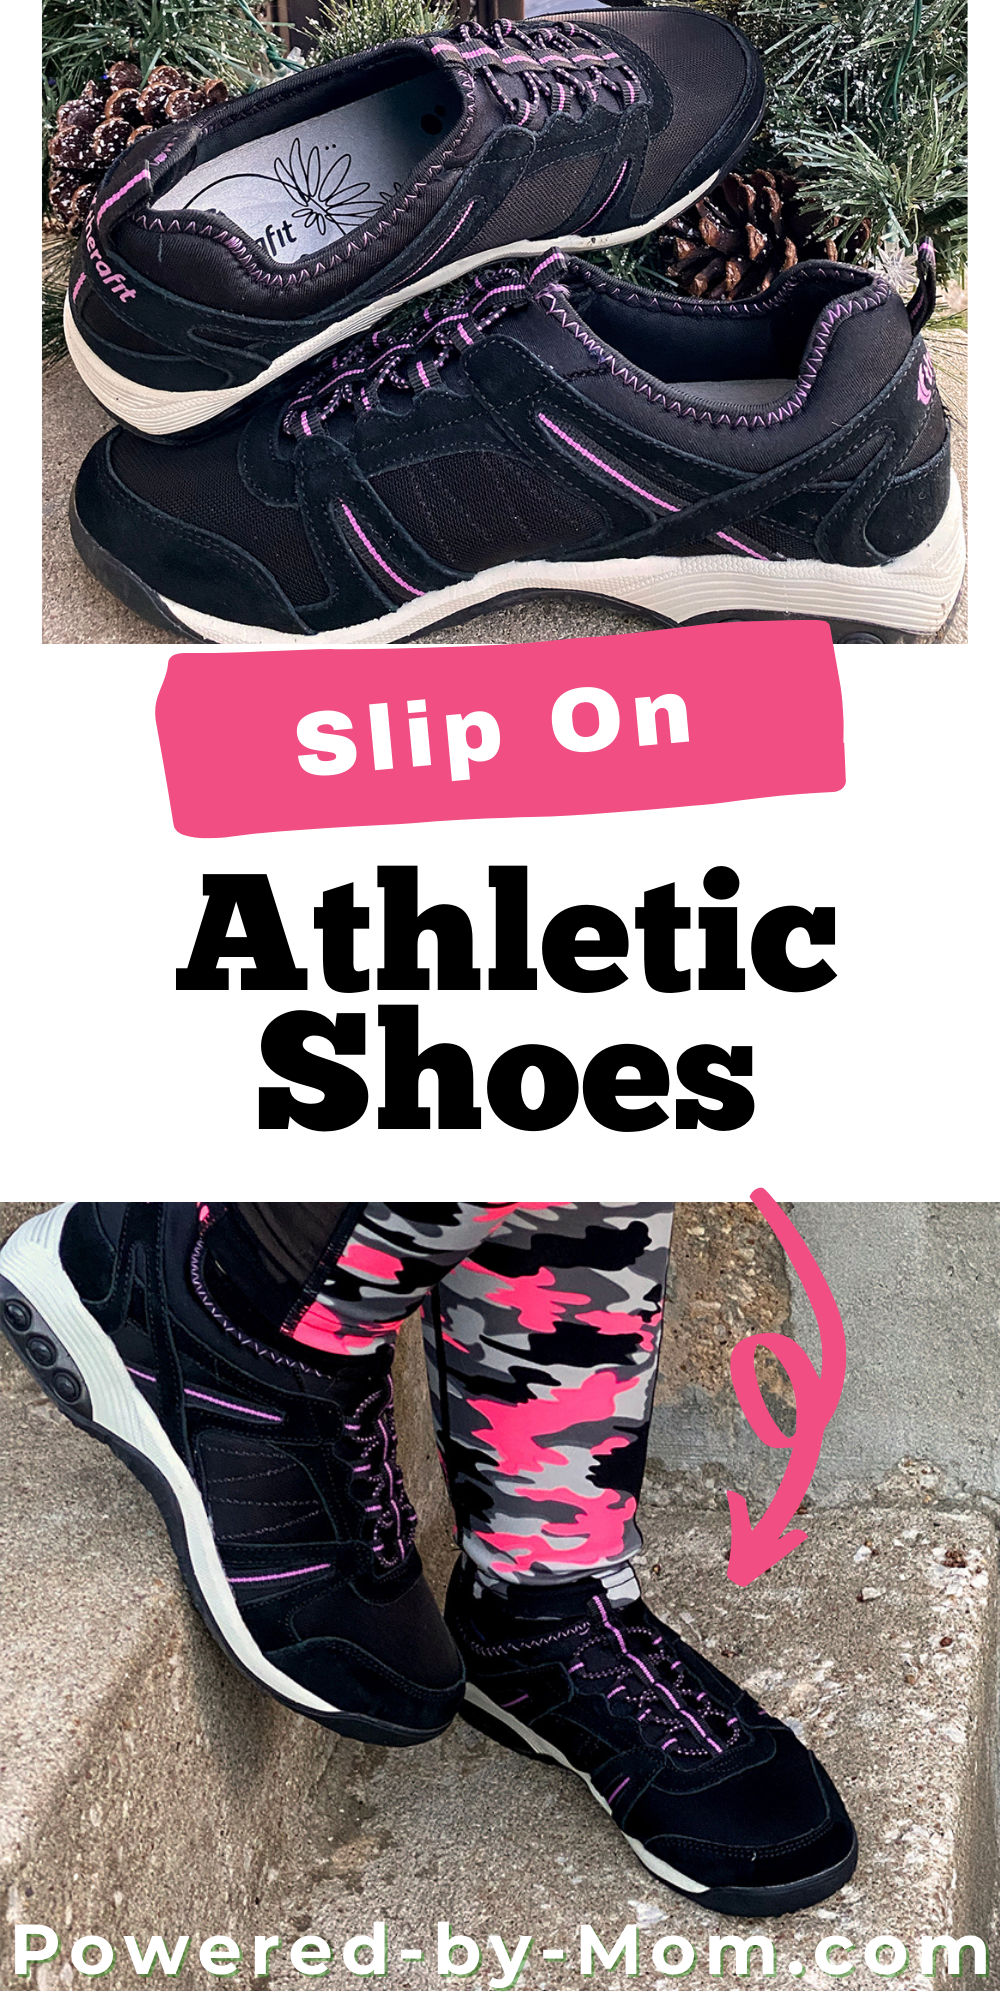 Try Therafit's Dawn slip on athletic shoes. They are quick and easy to put on, and stay on through your whole workout.